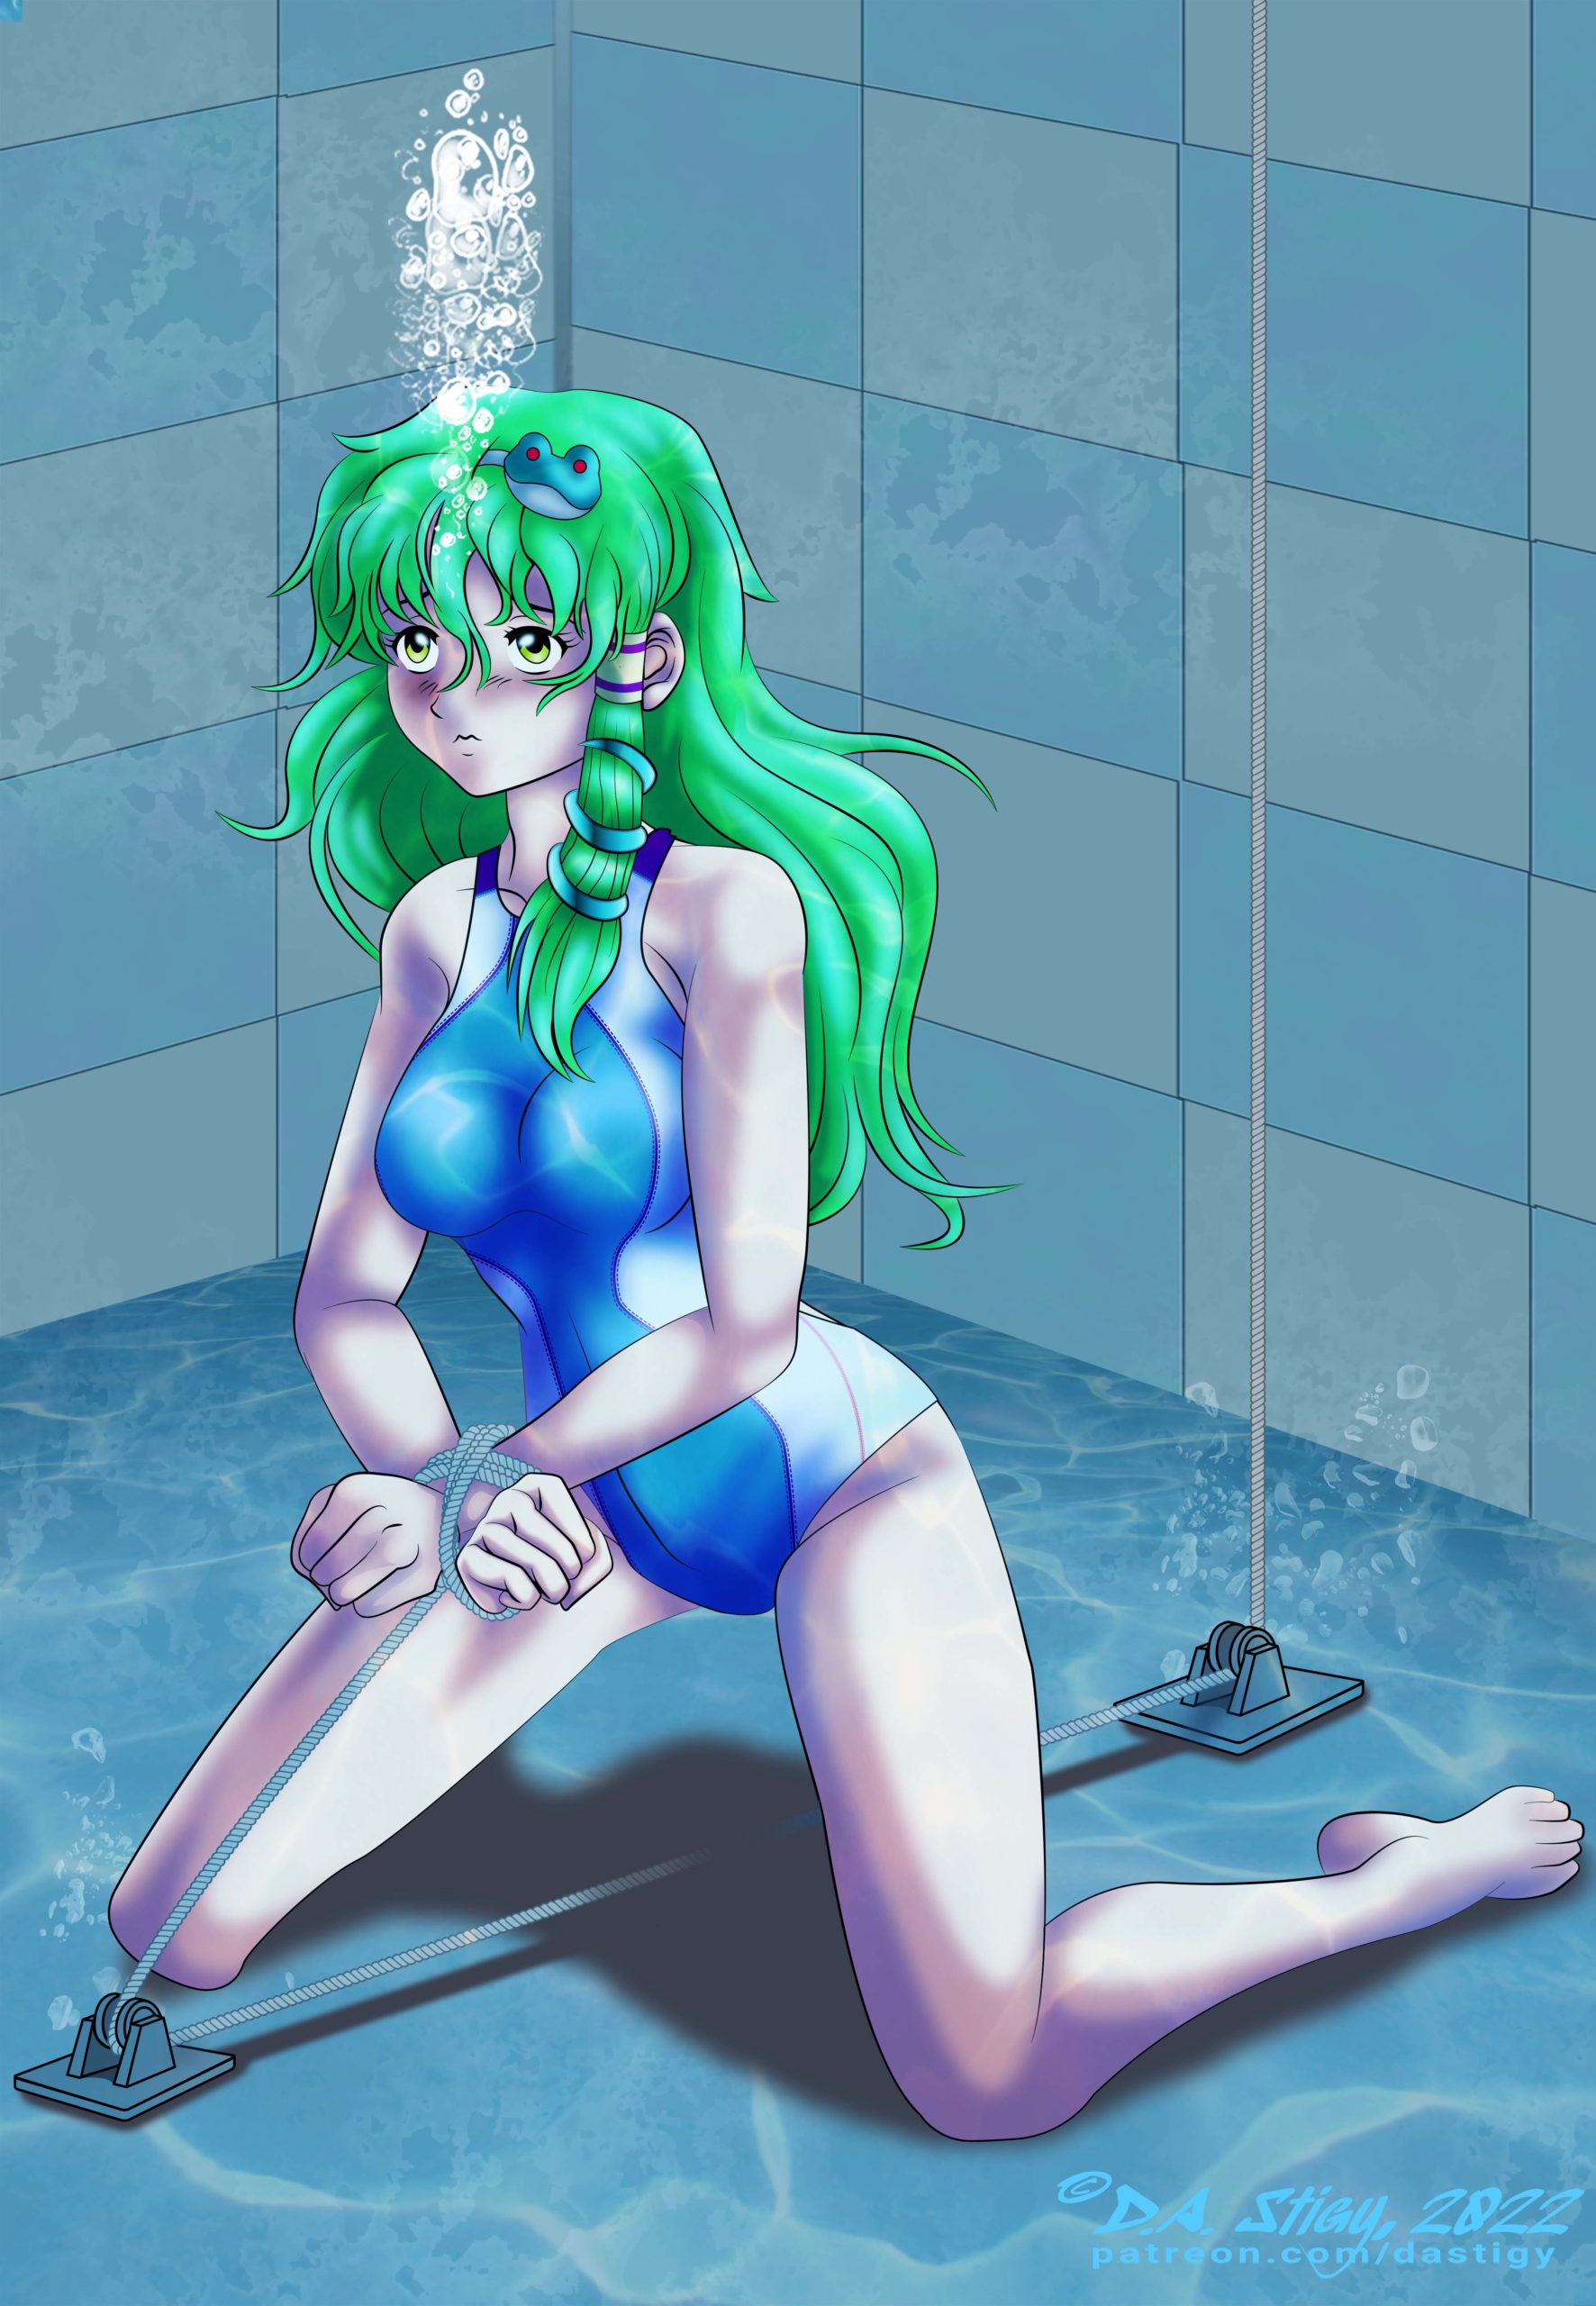 Sanae Kochiya, held on the bottom of a pool by ropes and pulleys